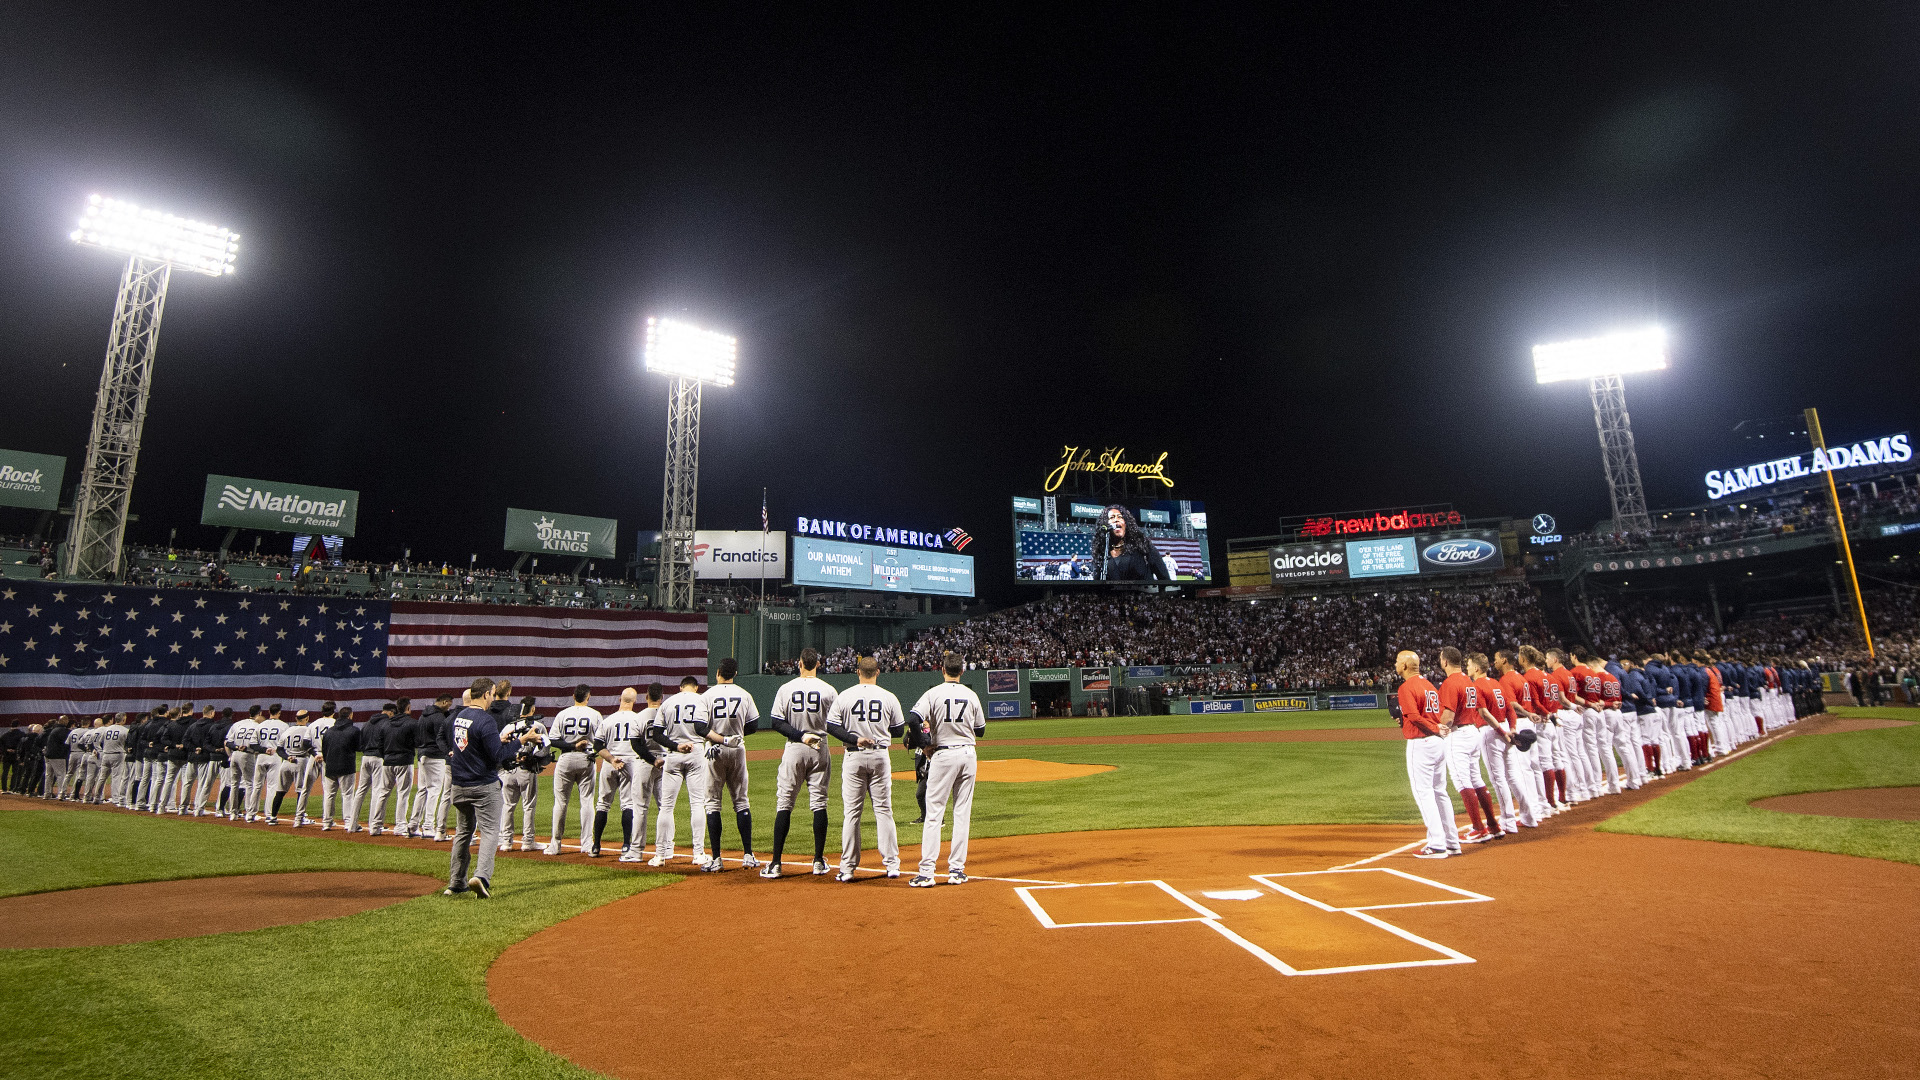 Yankees vs Red Sox live stream how to watch 2022 MLB Opening Day